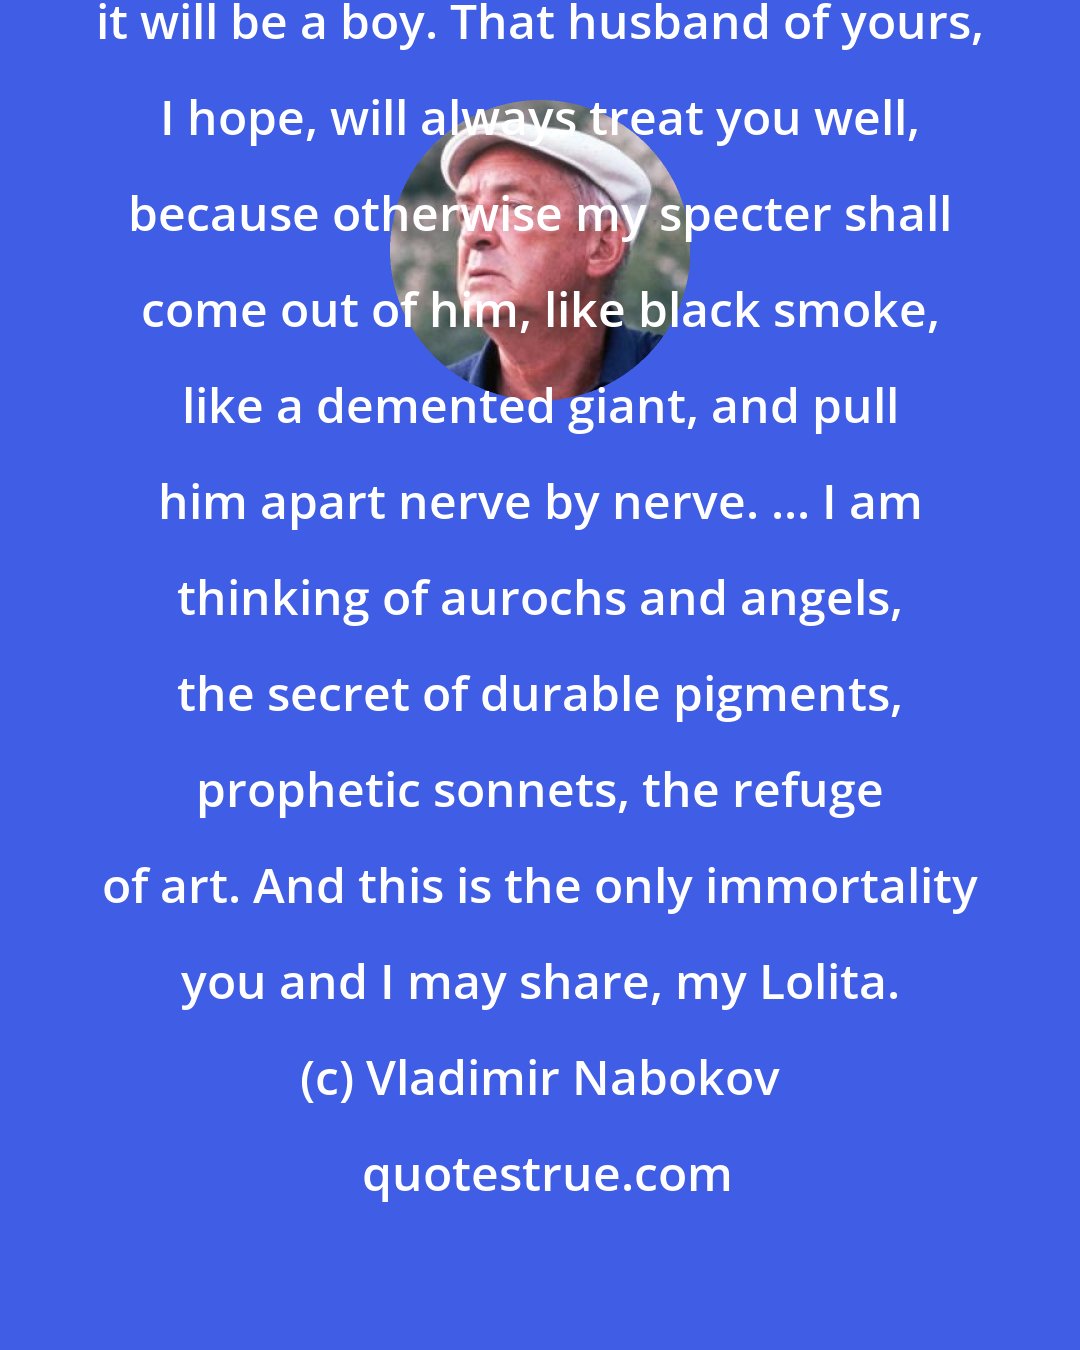 Vladimir Nabokov: I hope you will love your baby. I hope it will be a boy. That husband of yours, I hope, will always treat you well, because otherwise my specter shall come out of him, like black smoke, like a demented giant, and pull him apart nerve by nerve. ... I am thinking of aurochs and angels, the secret of durable pigments, prophetic sonnets, the refuge of art. And this is the only immortality you and I may share, my Lolita.